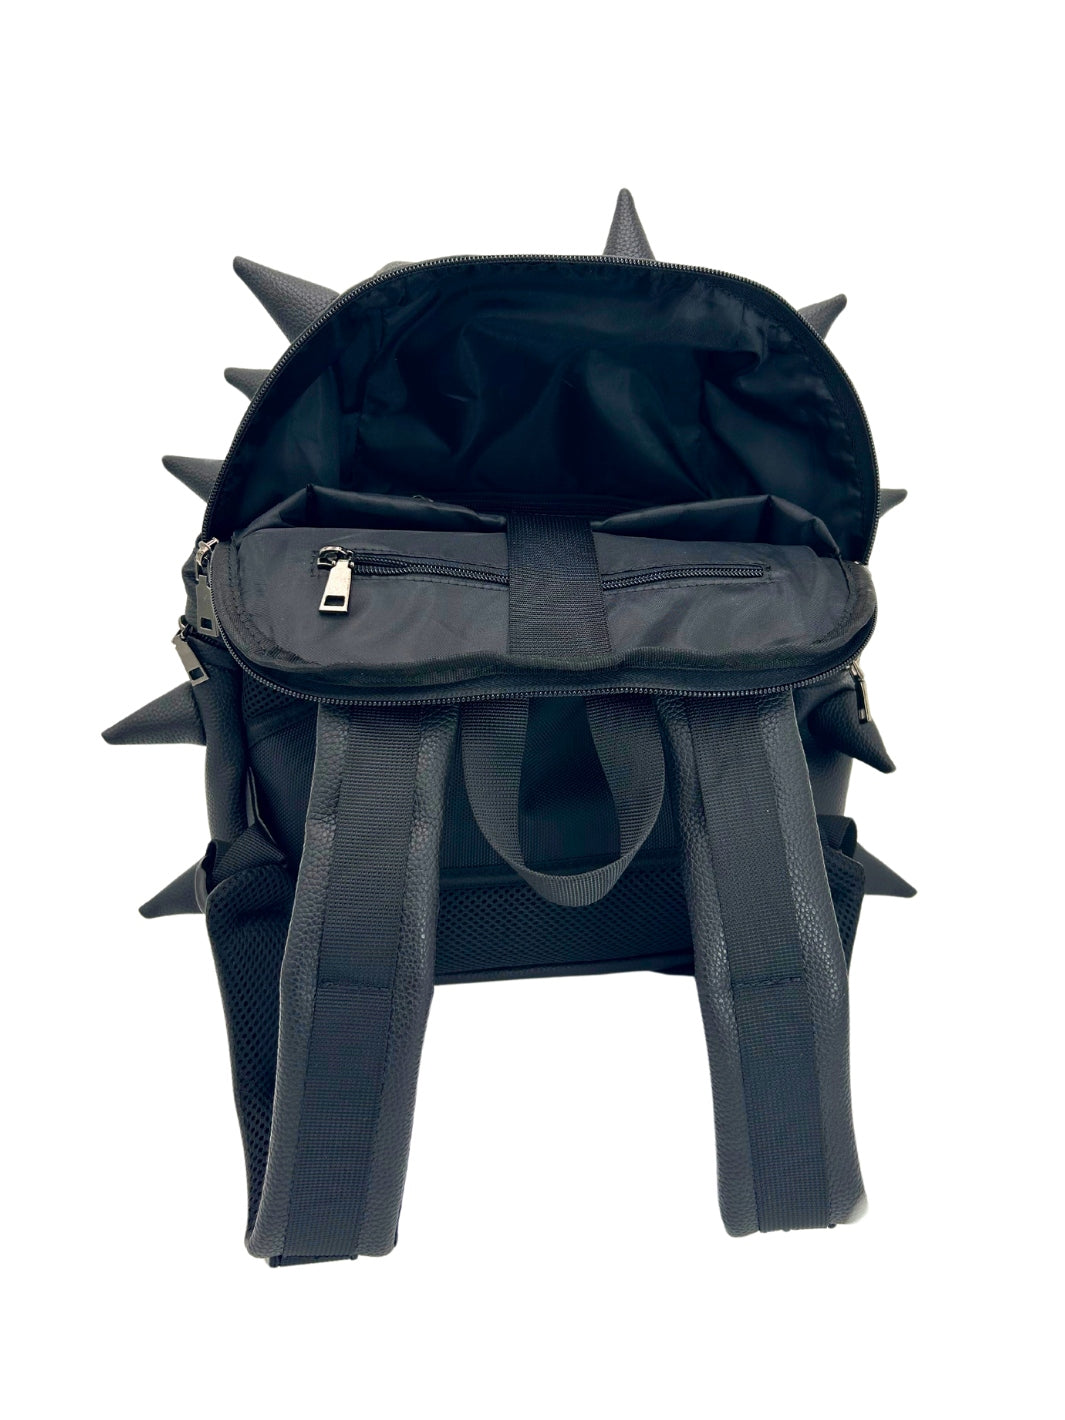 Black Daypack | Got Your Black by Madpax Inside View